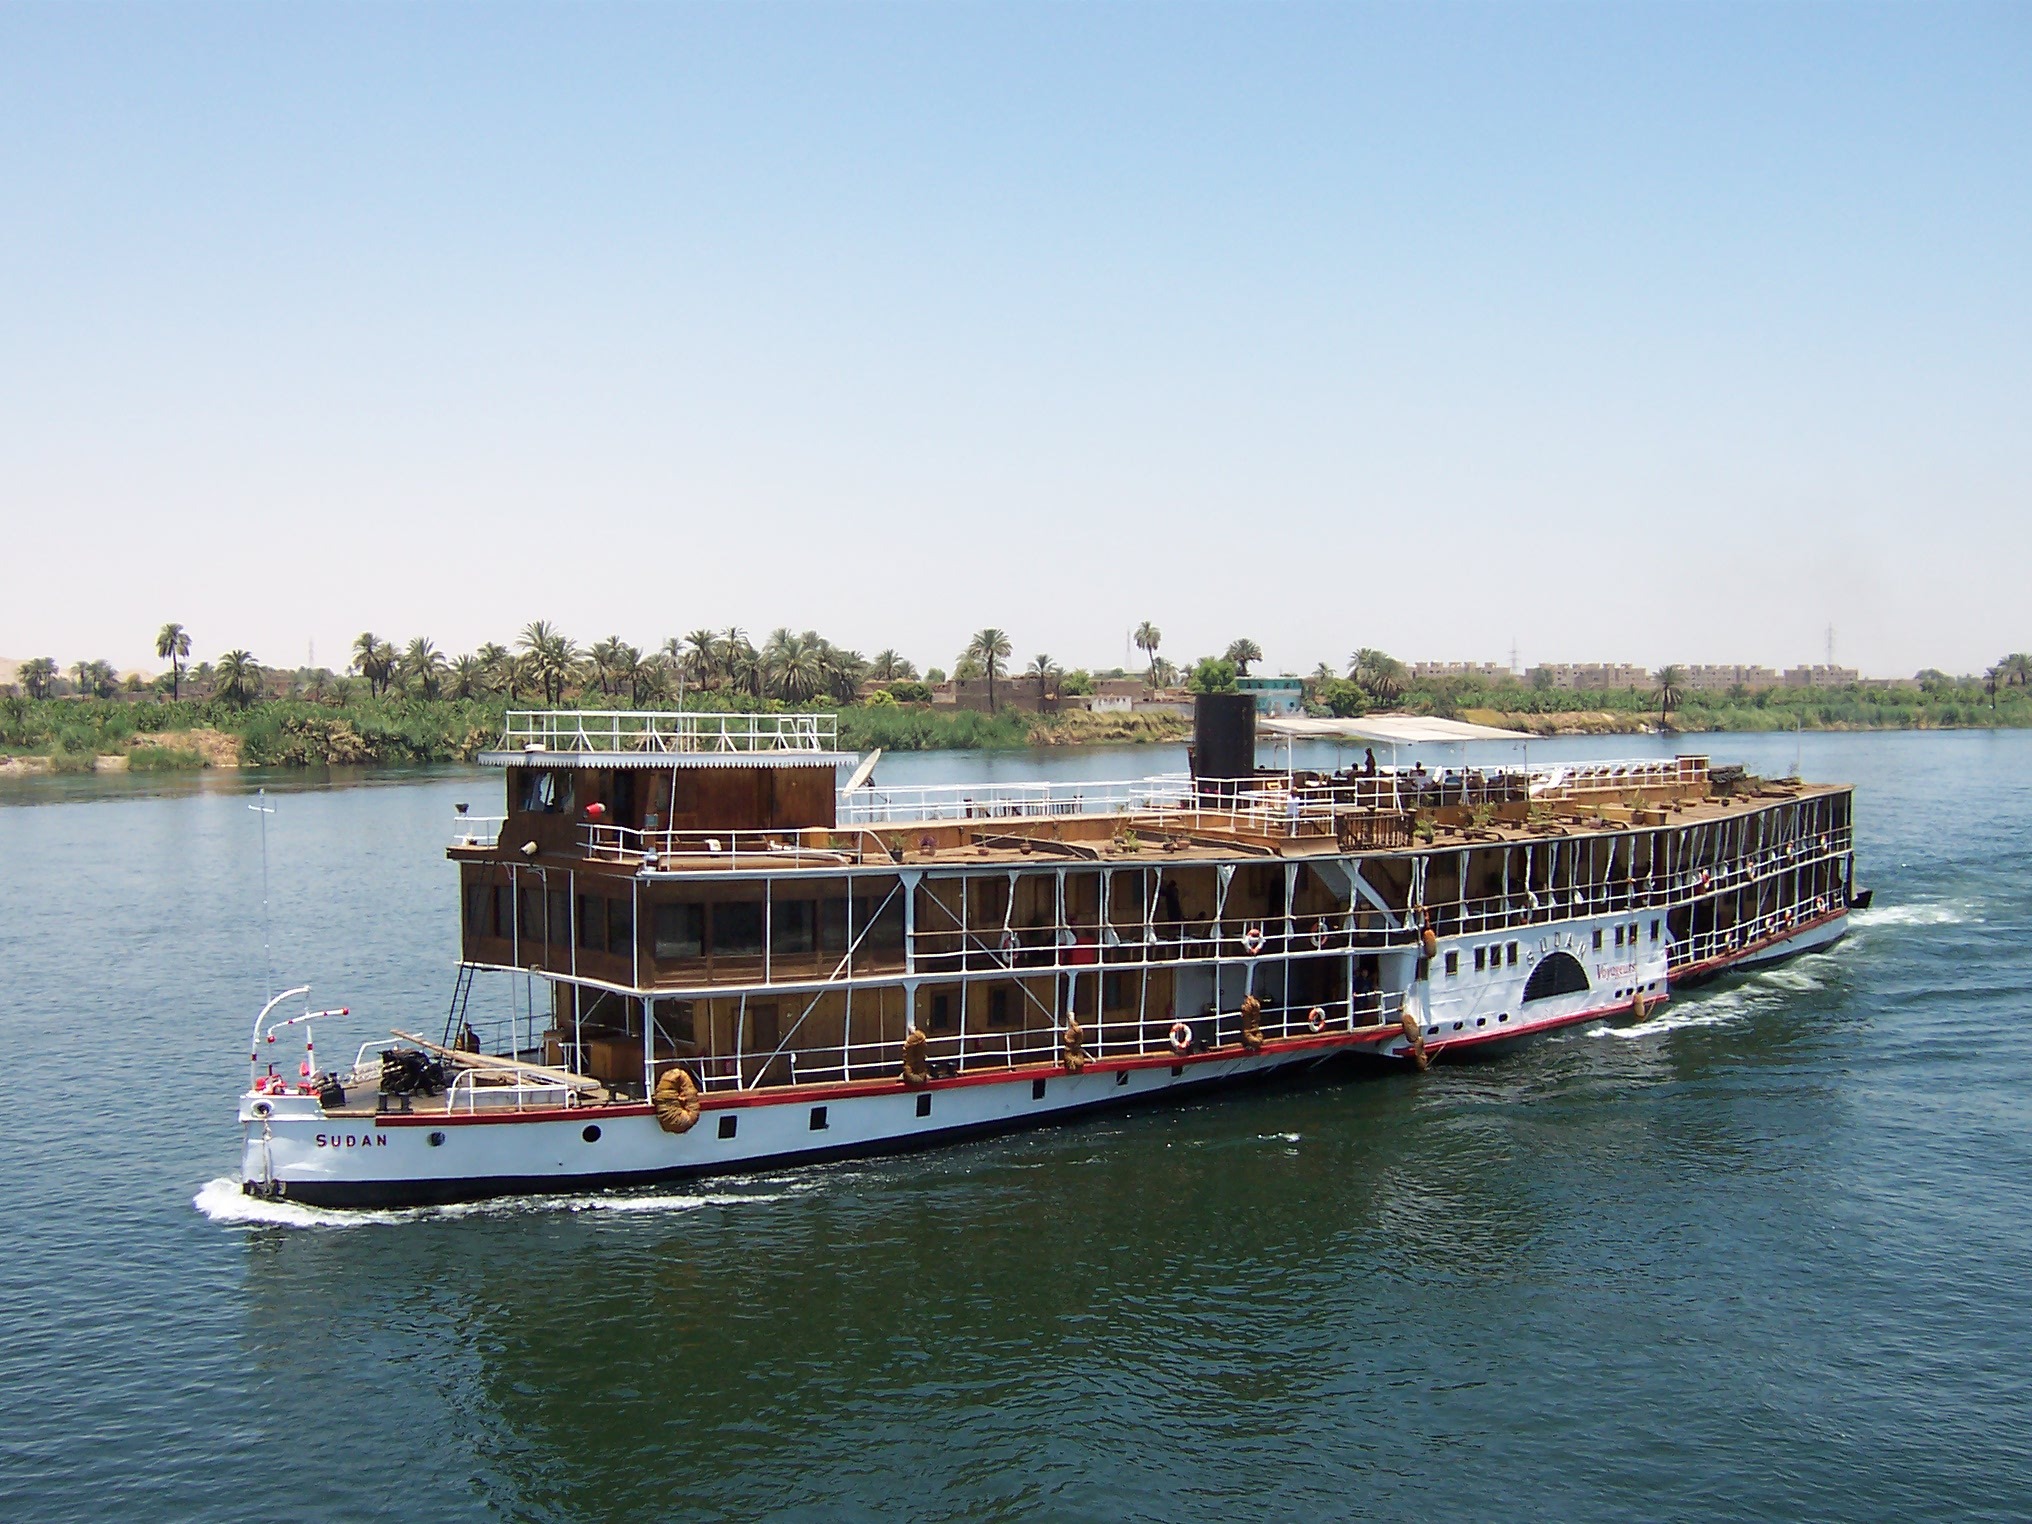 Journey in the nile photo